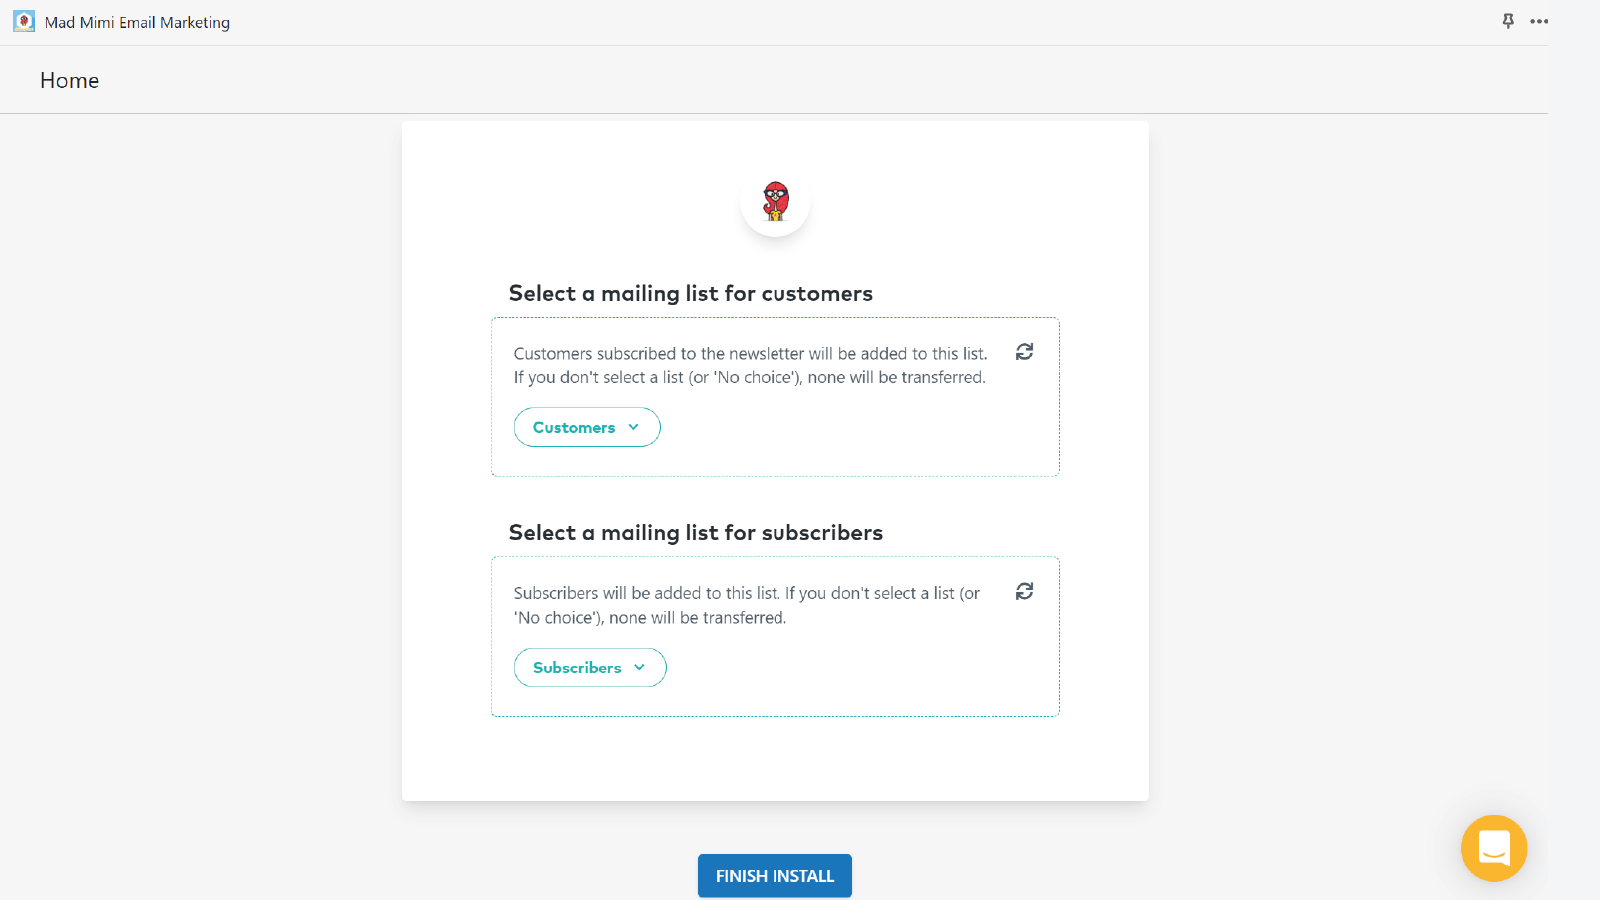 Select a list for customers and subscribers